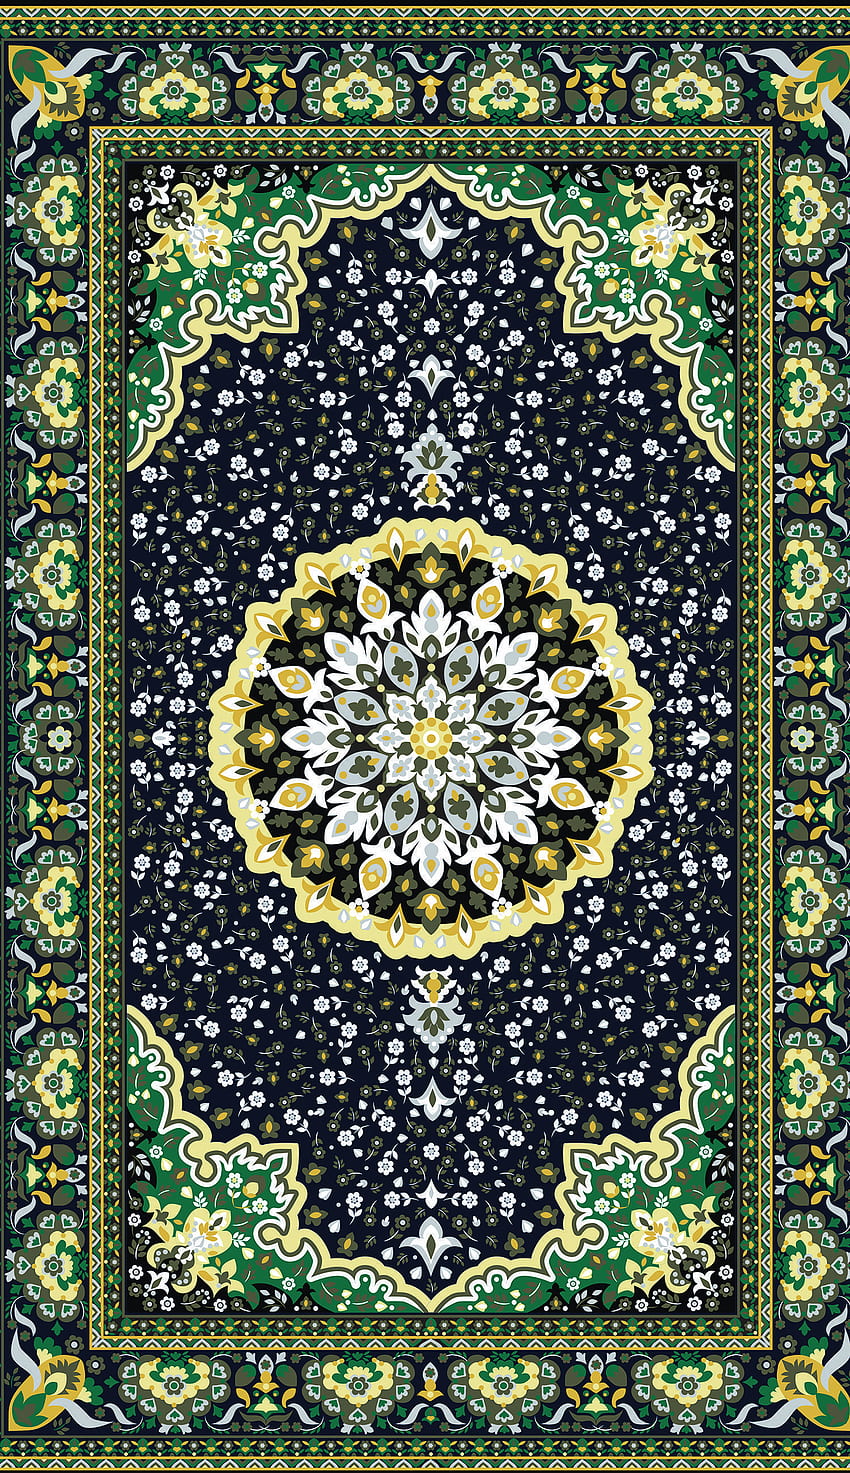 Green Carpet & Mandala iPhone by This is iT Original. Motif batik, Mandala iphone, iPhone HD phone wallpaper